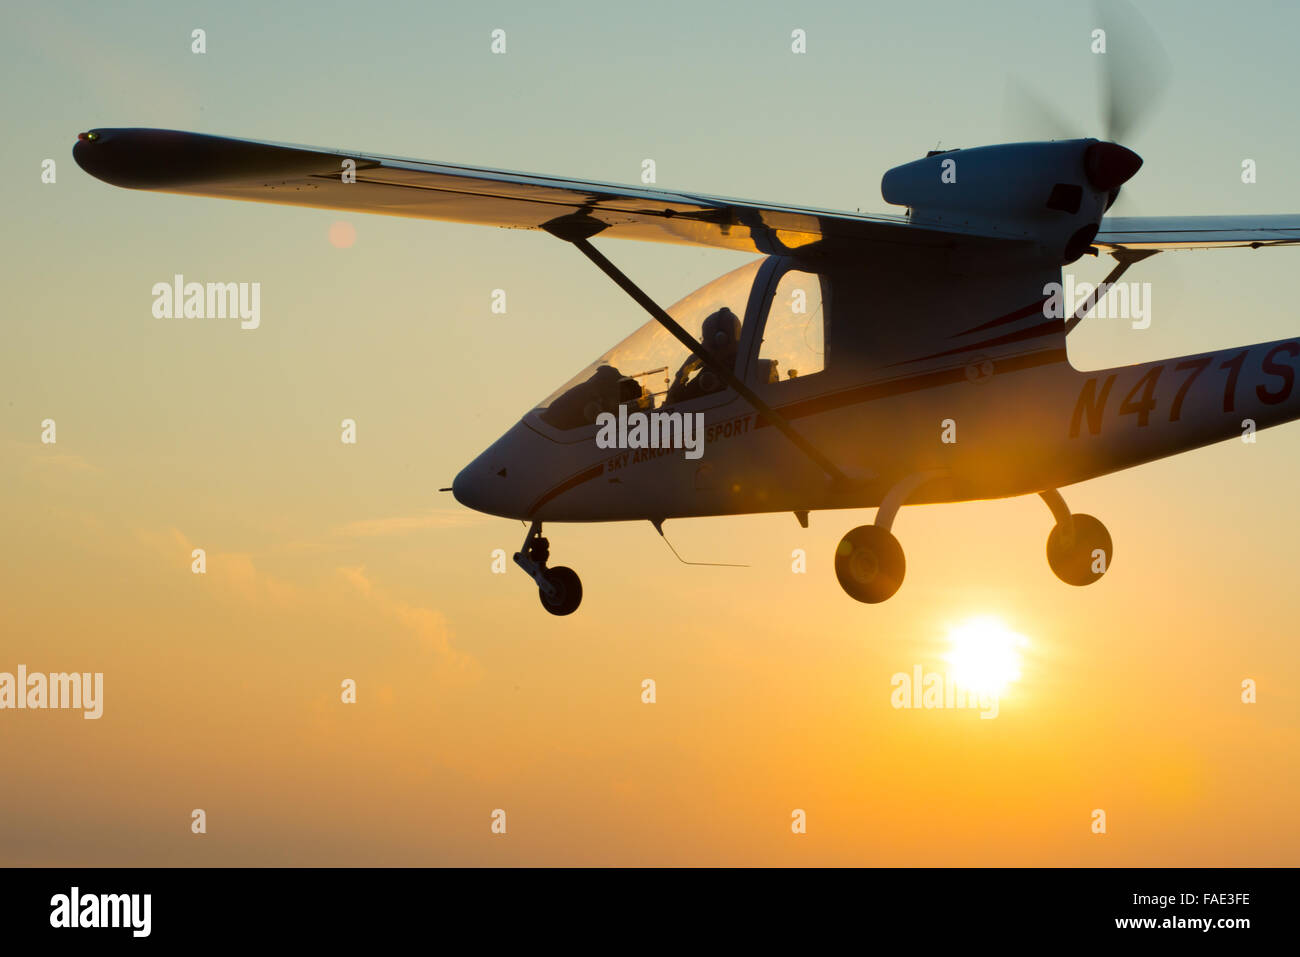 Plane flying at sunset in Maryland Stock Photo